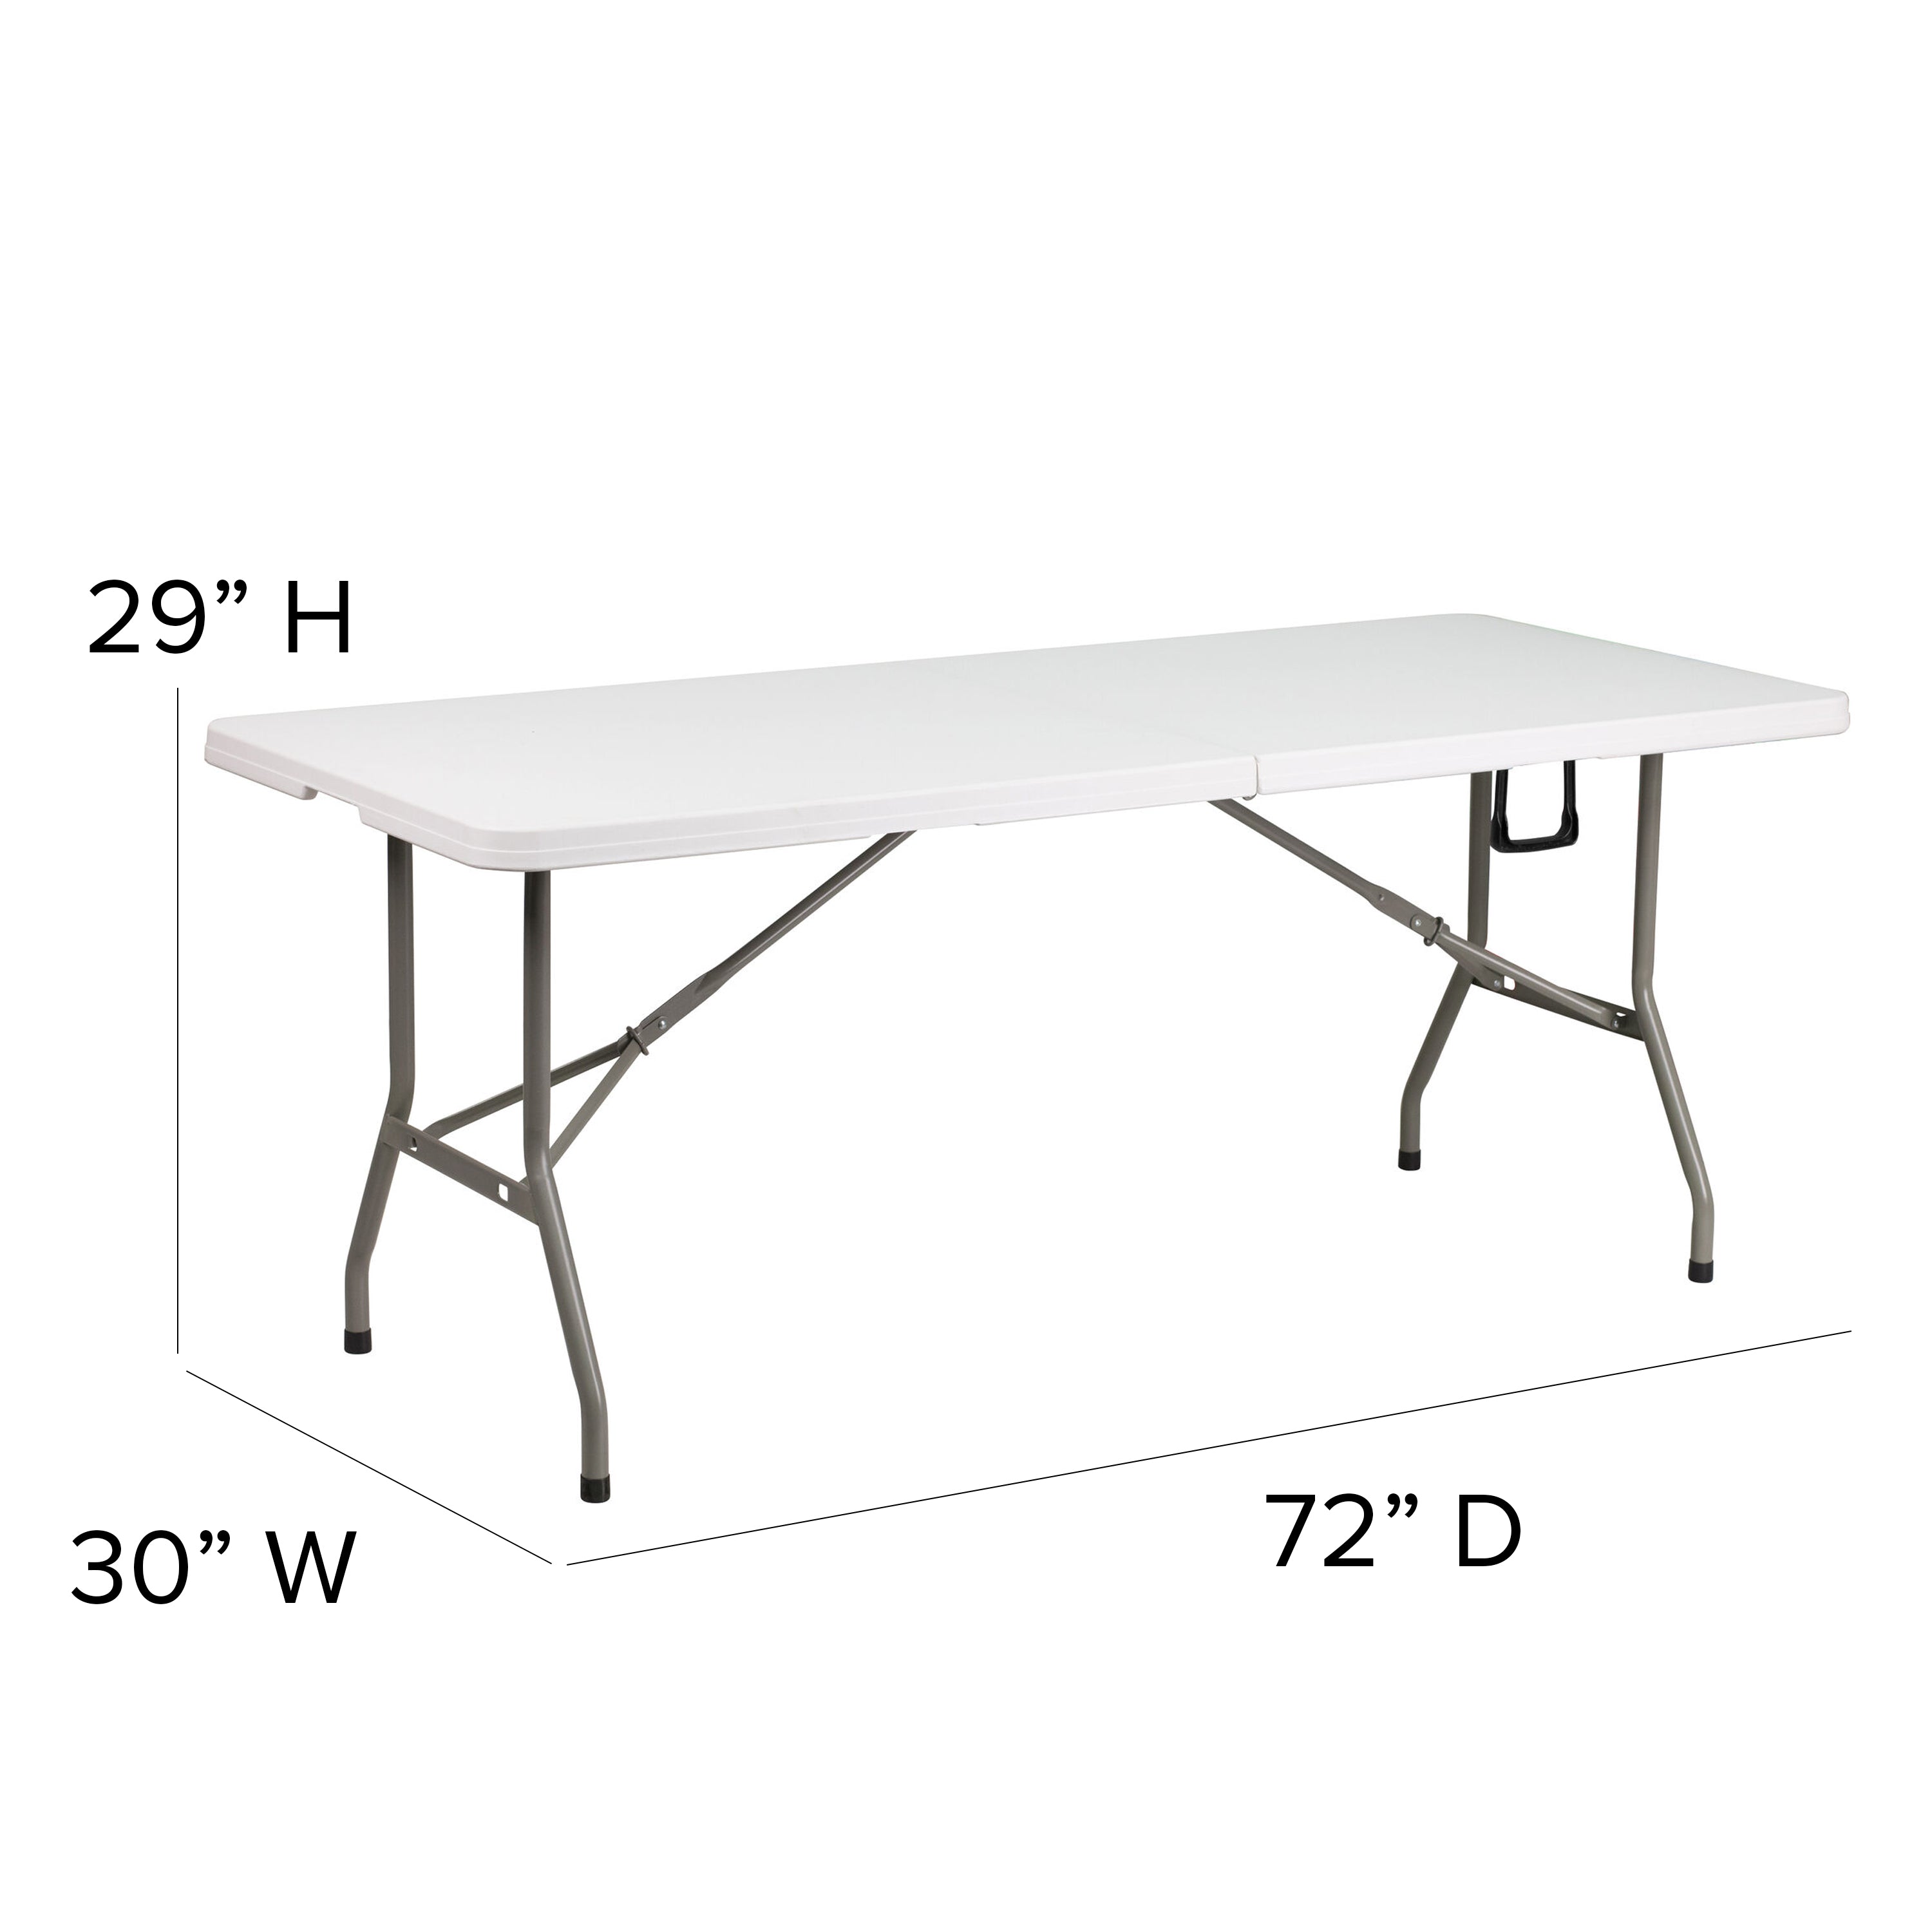 6-Foot Bi-Fold Plastic Banquet and Event Folding Table with Carrying Handle-Rectangular Plastic Folding Table-Flash Furniture-Wall2Wall Furnishings